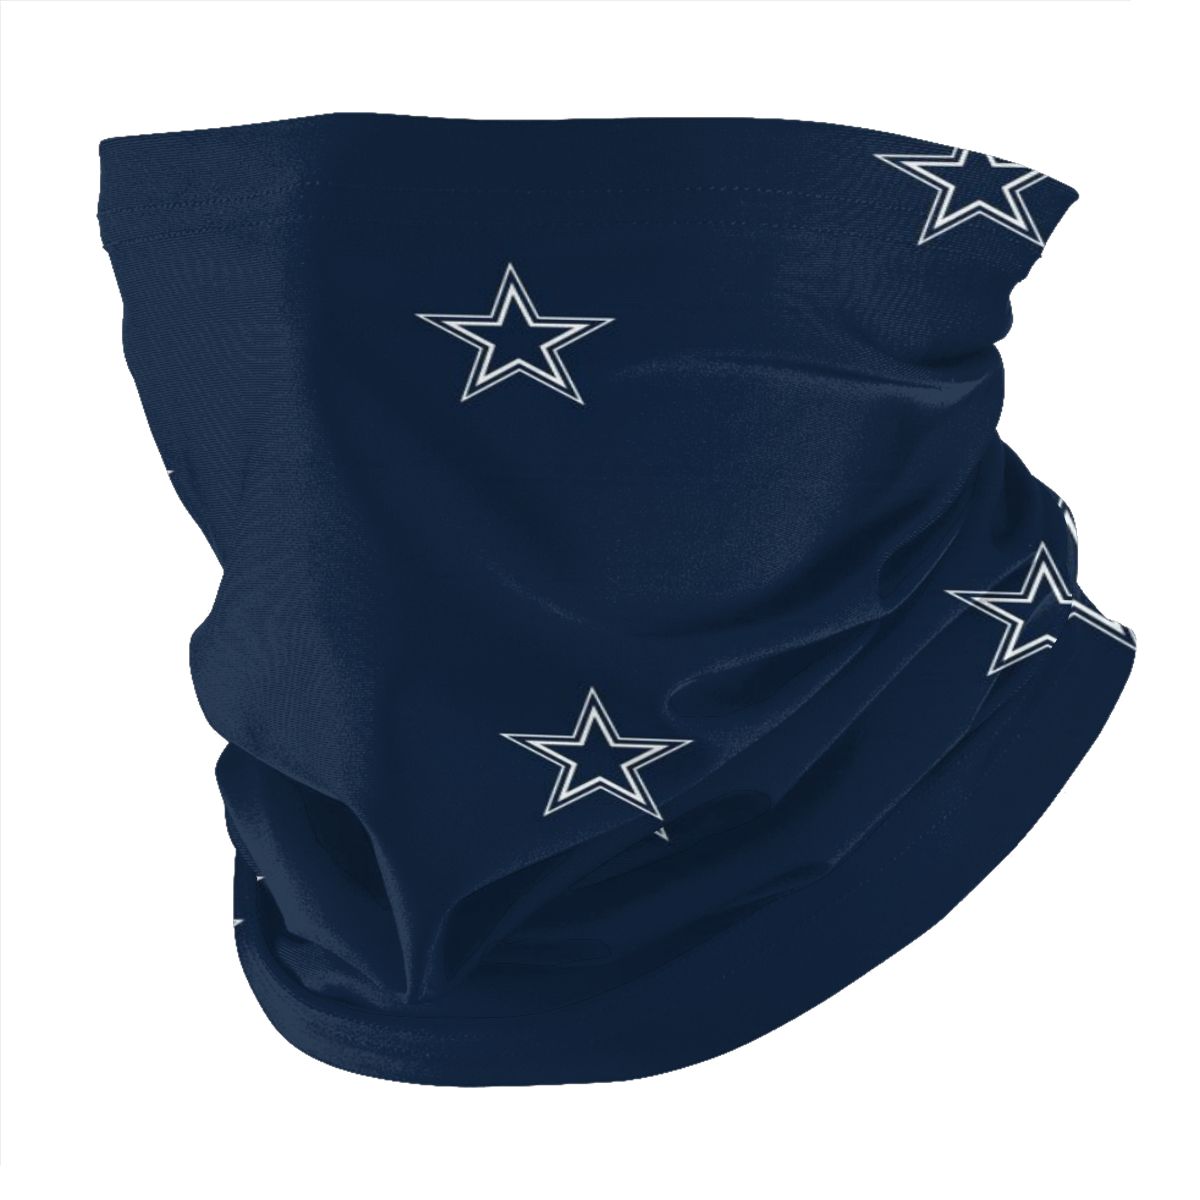 Reusble Mouth Cover Bandanas Dallas Cowboys Variety Head Scarf Face Mask With PM 2.5 Filter